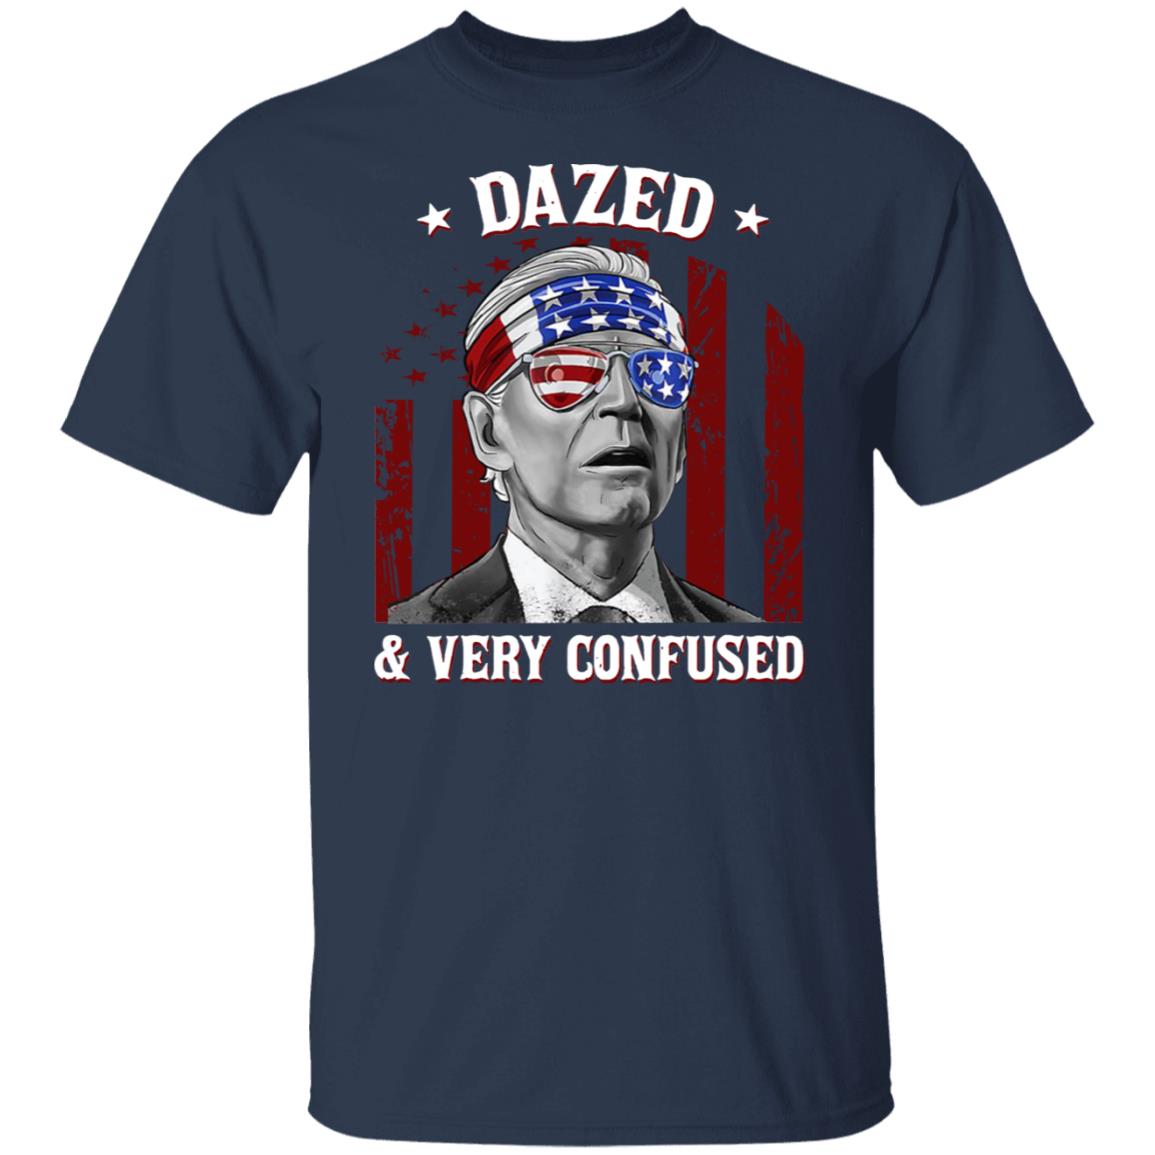 Biden - Dazed And Very Confused Shirt | Allbluetees.com